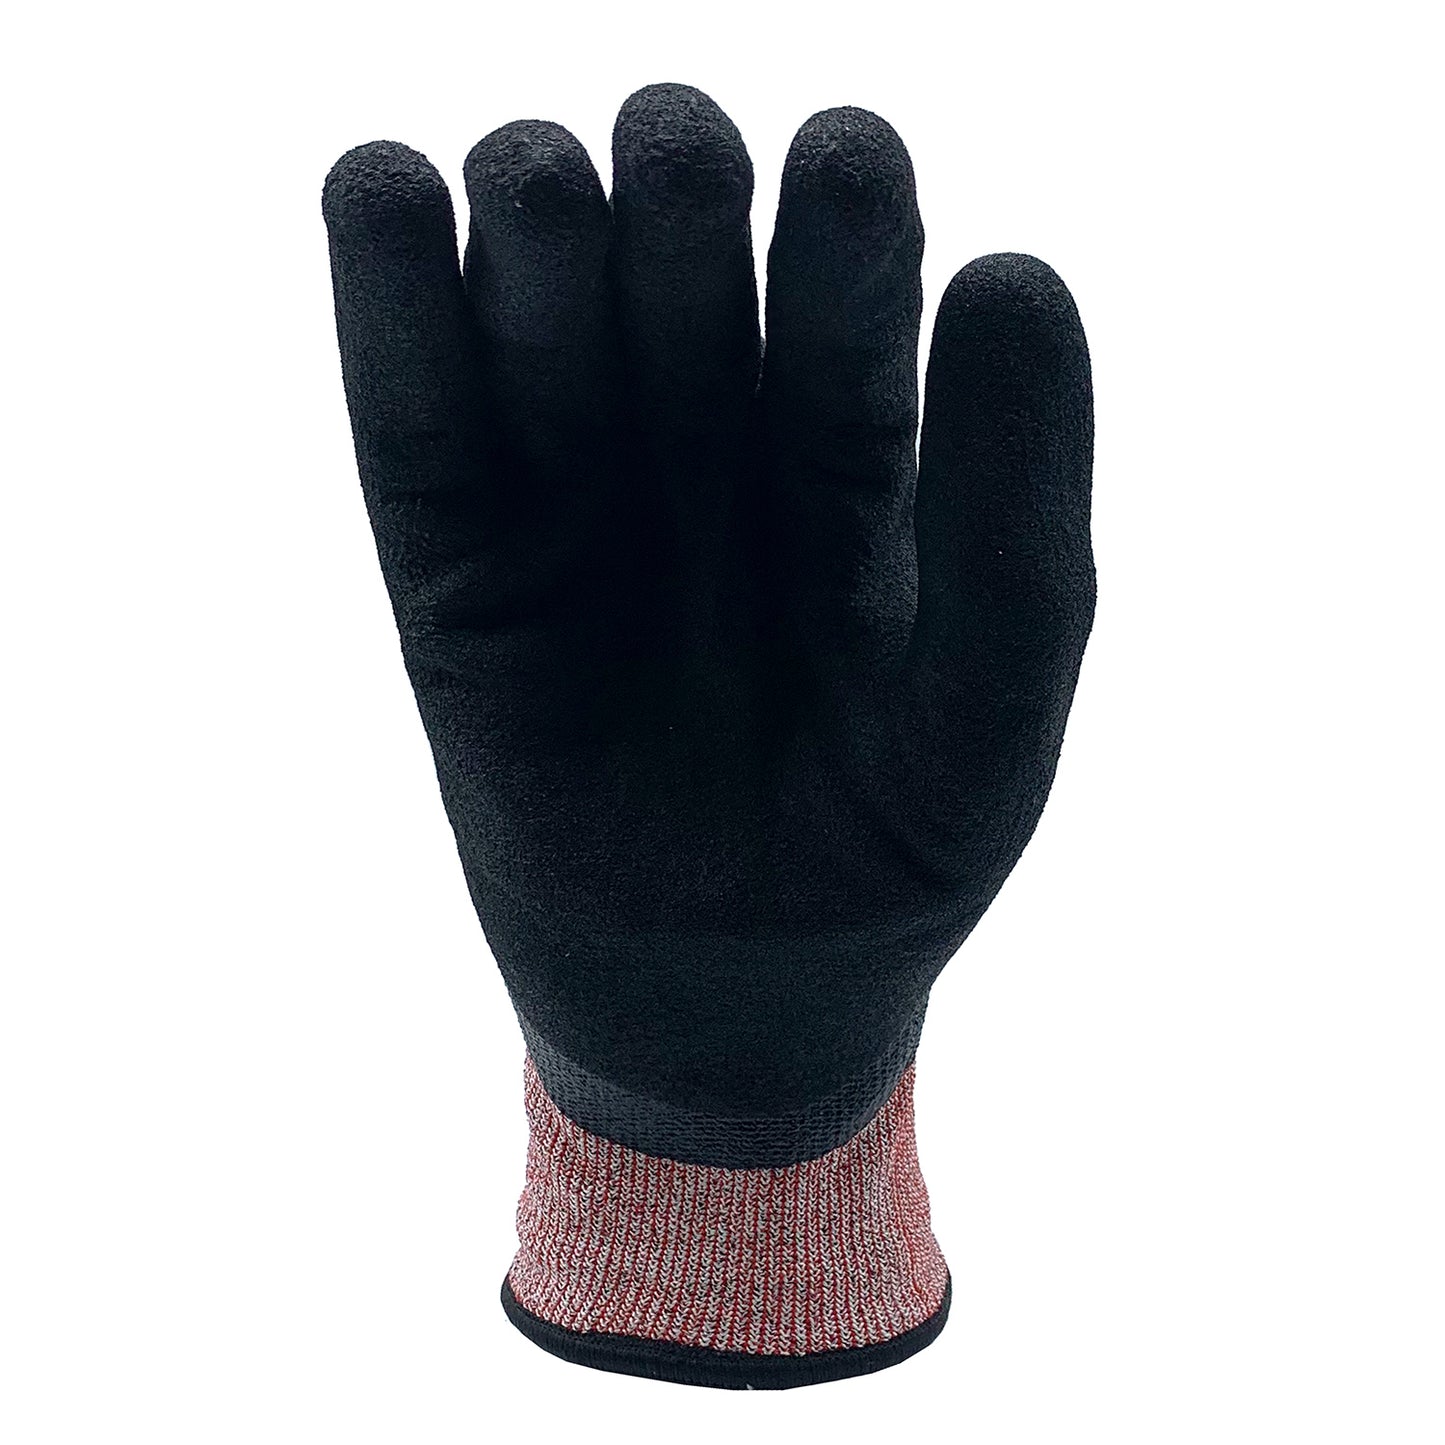 Ice Cut-Resistant Gloves, ANSI Cut Level A5, Cold Weather Protection